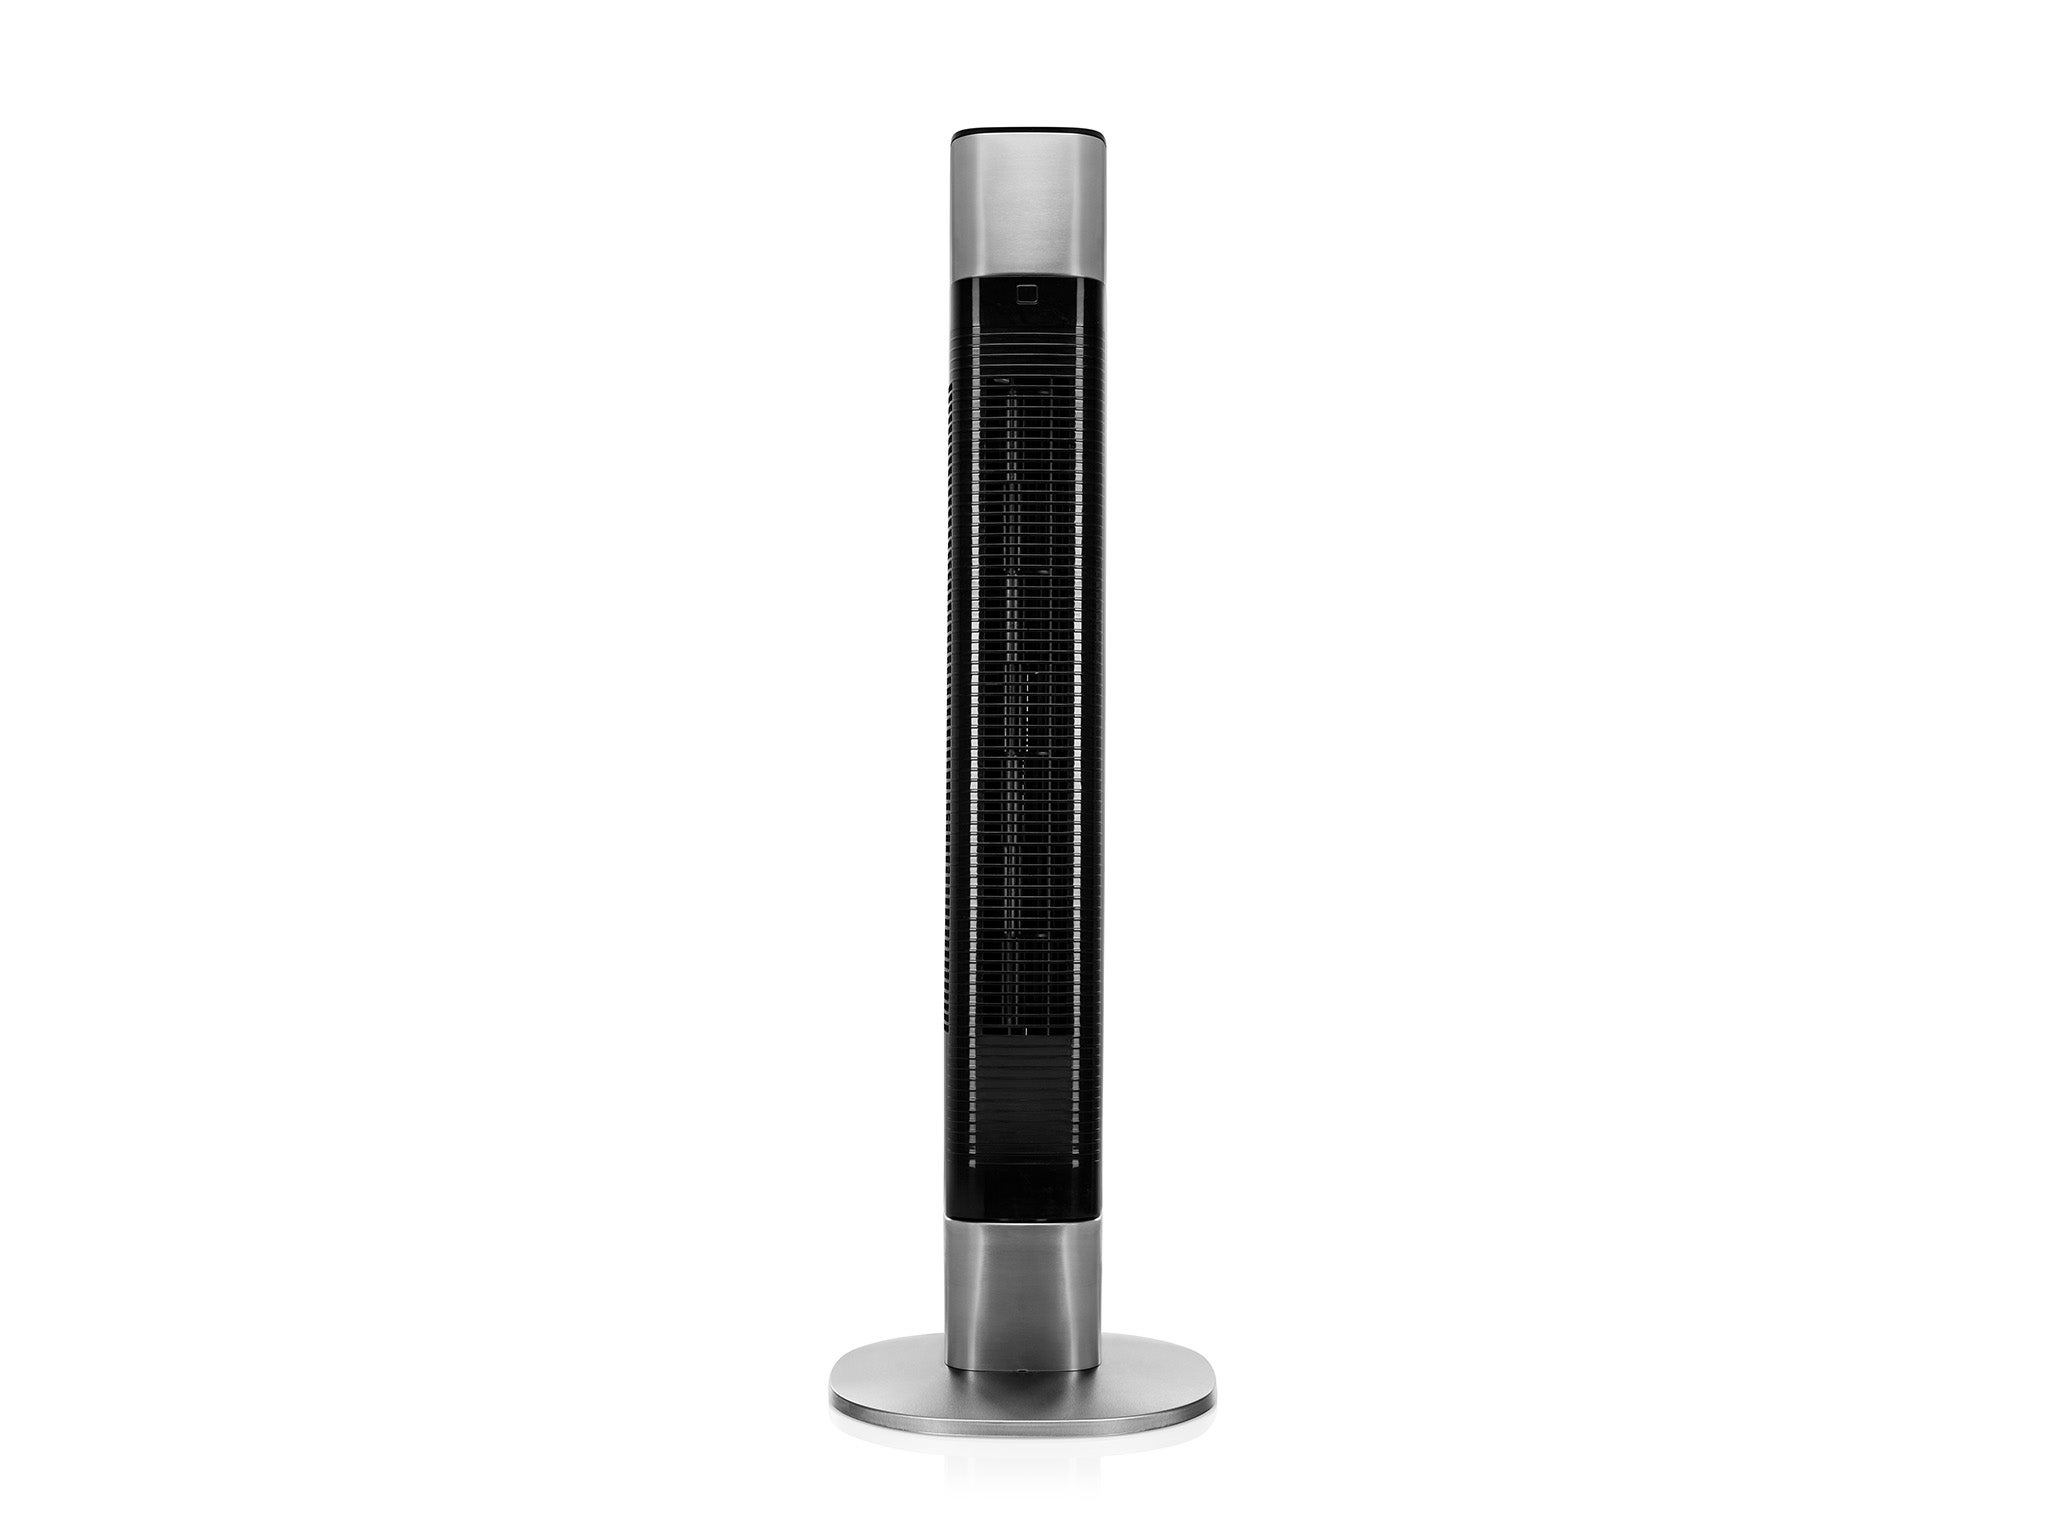 Princess smart Wi-Fi connected tower fan